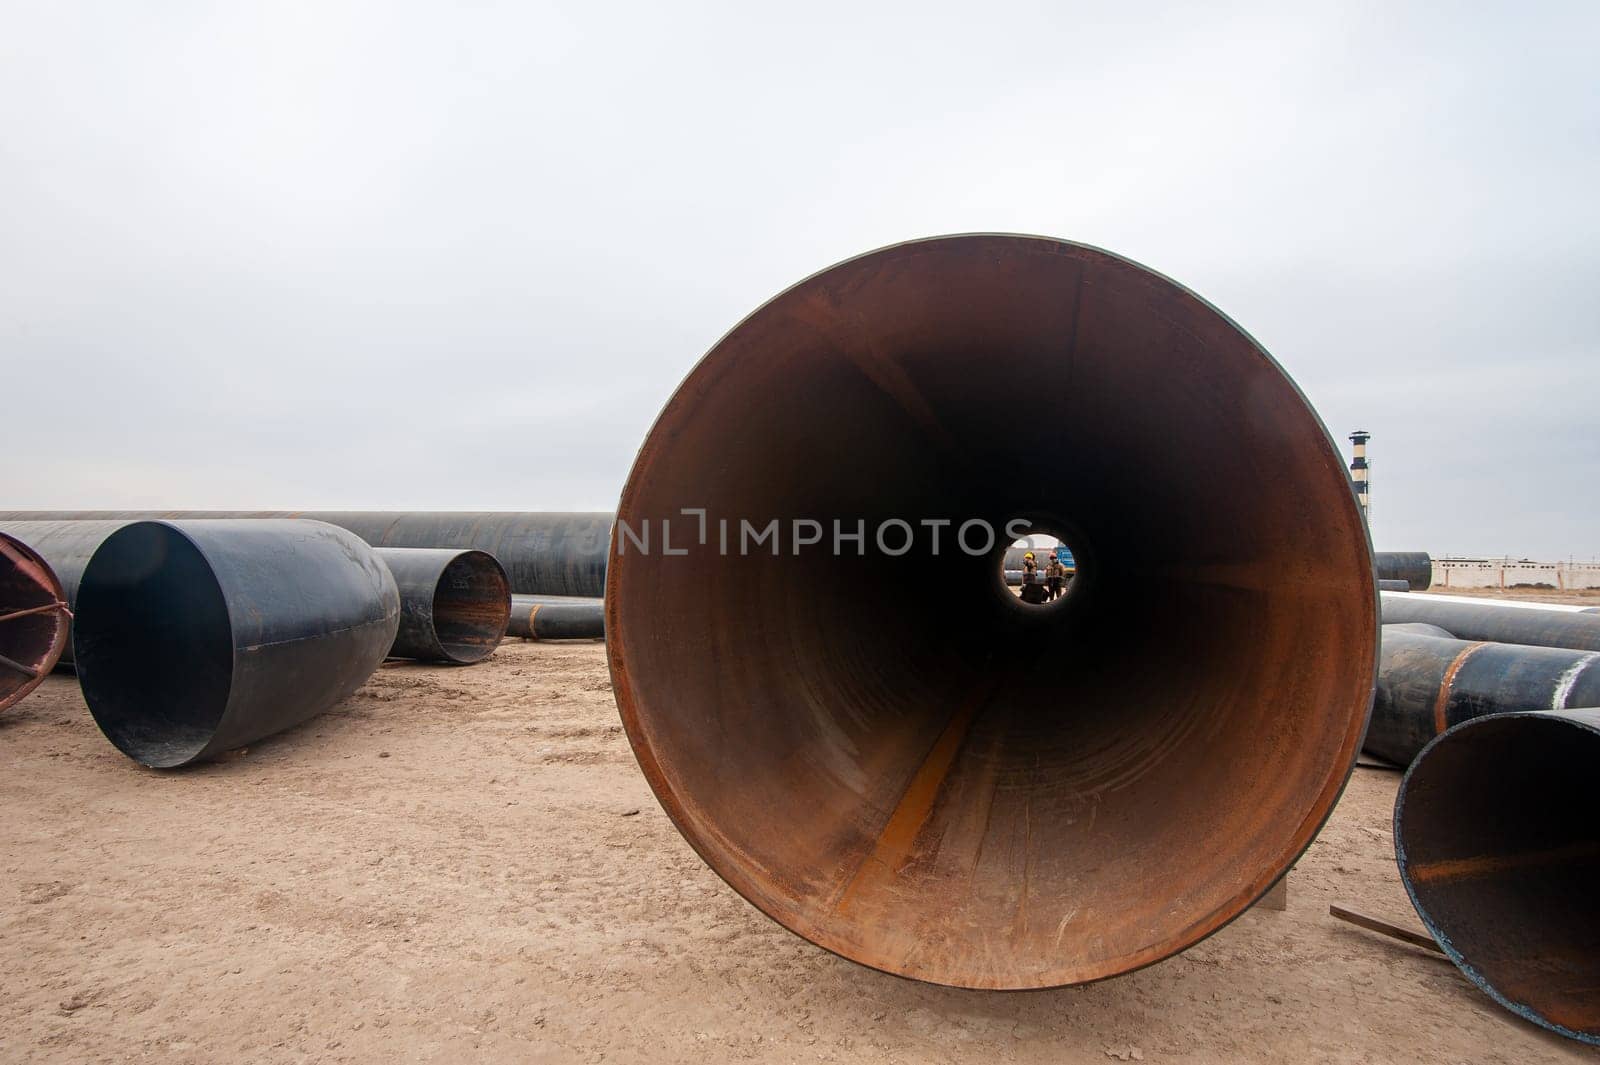 The large pipes at construction site